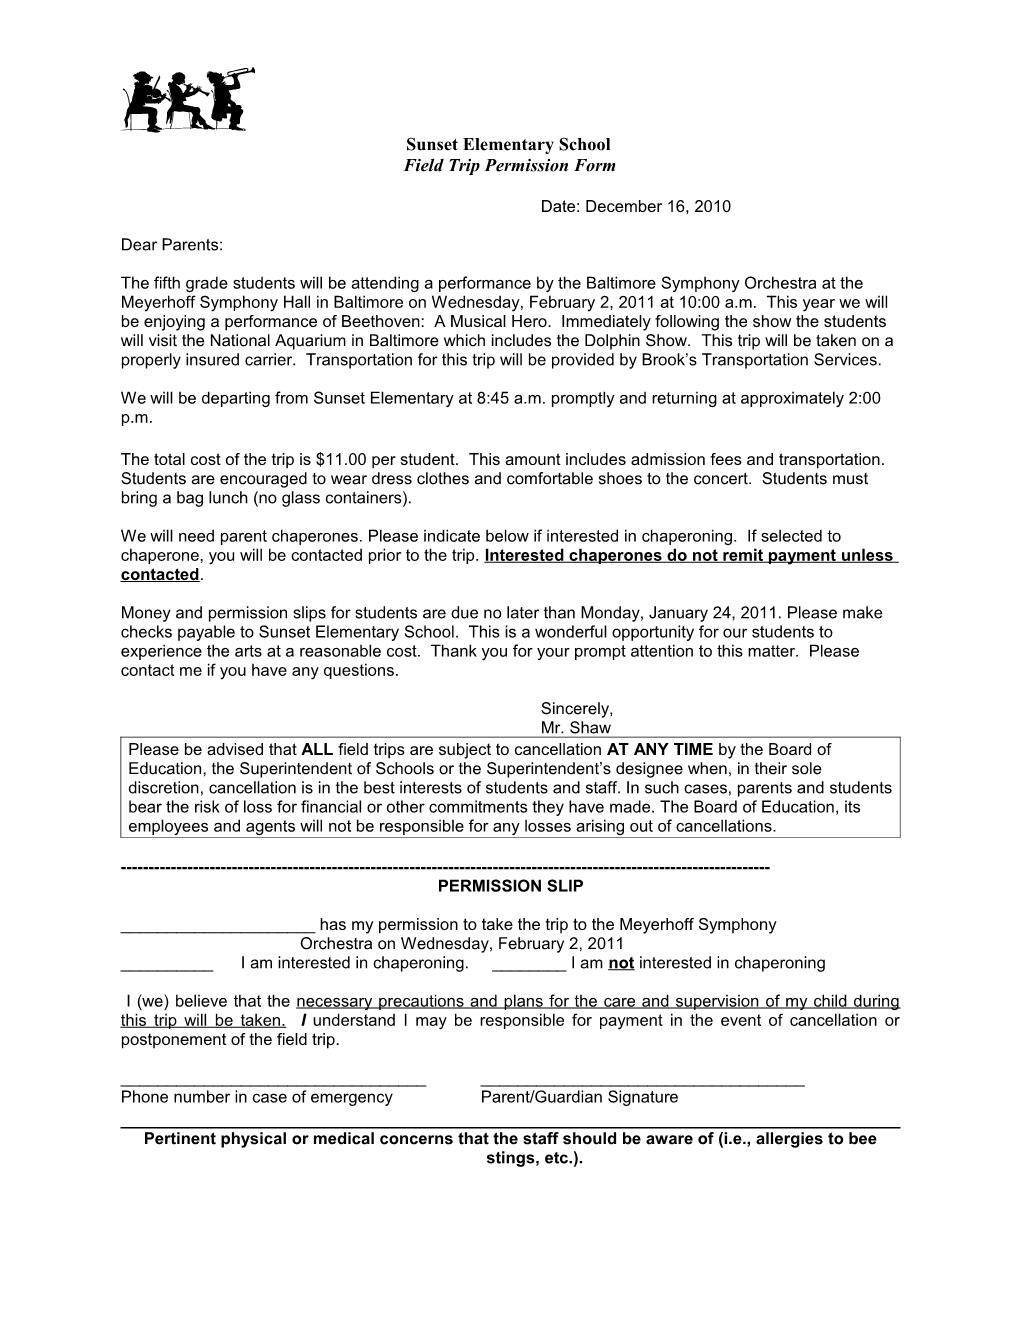 Letters and Forms for Field Trips Within